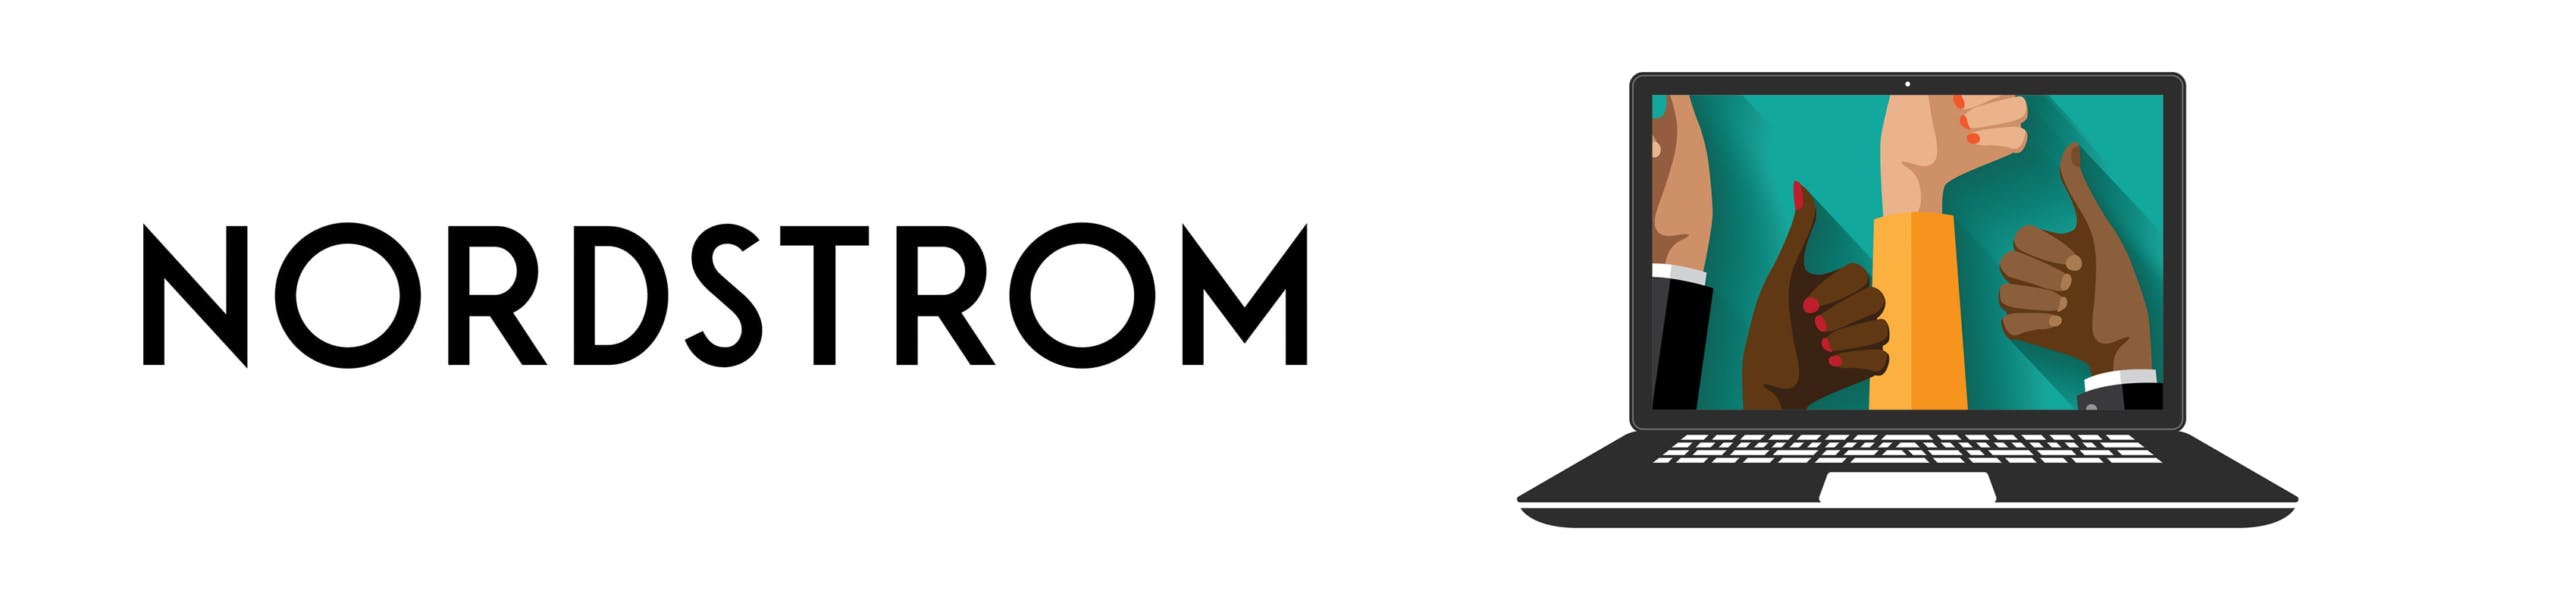 Nordstrom logo next to a laptop with thumbs pointing up